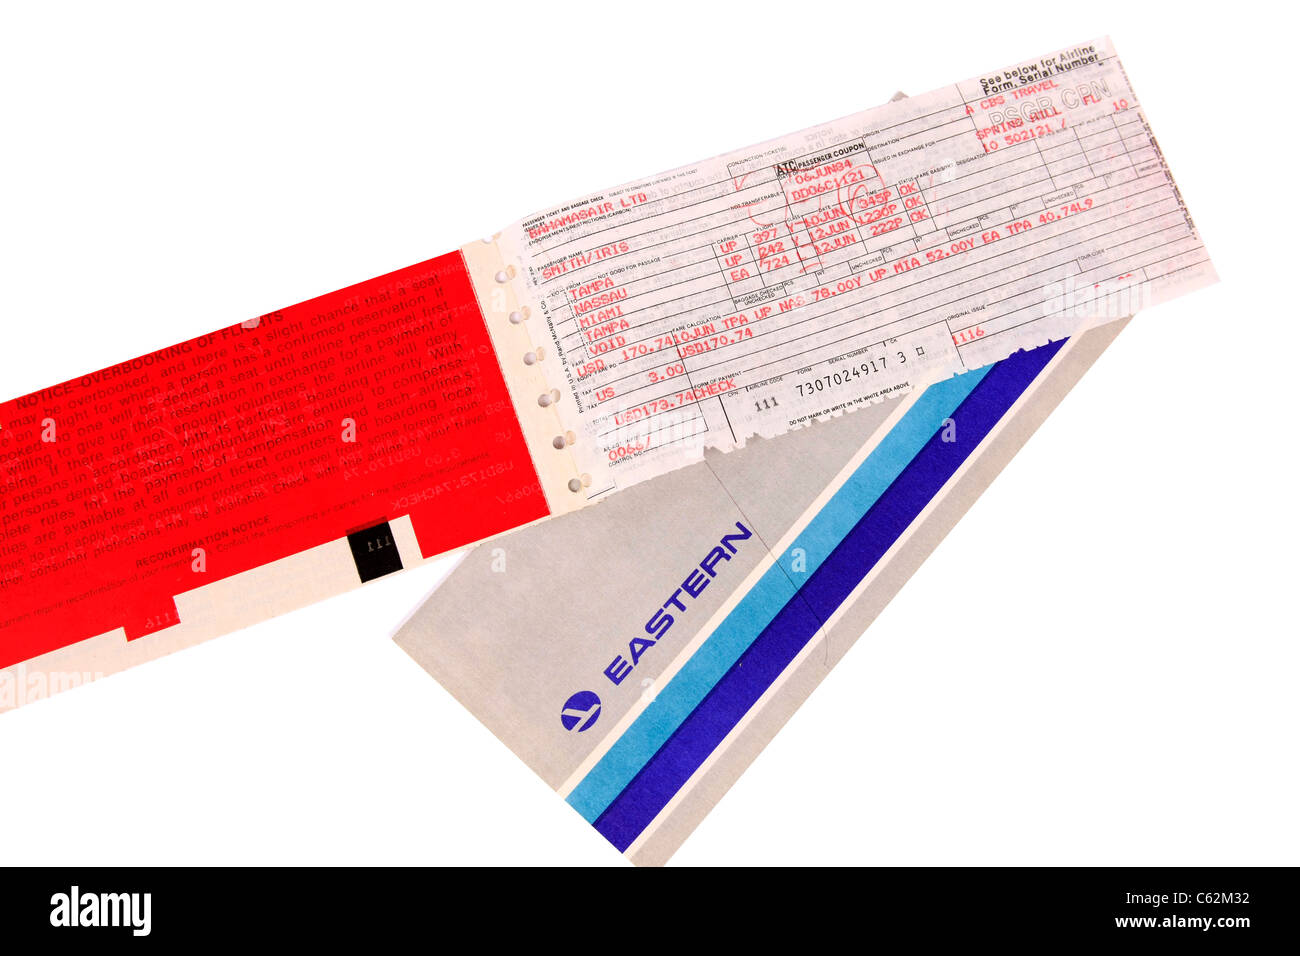 American Eastern Airlines Flight ticket Stock Photo